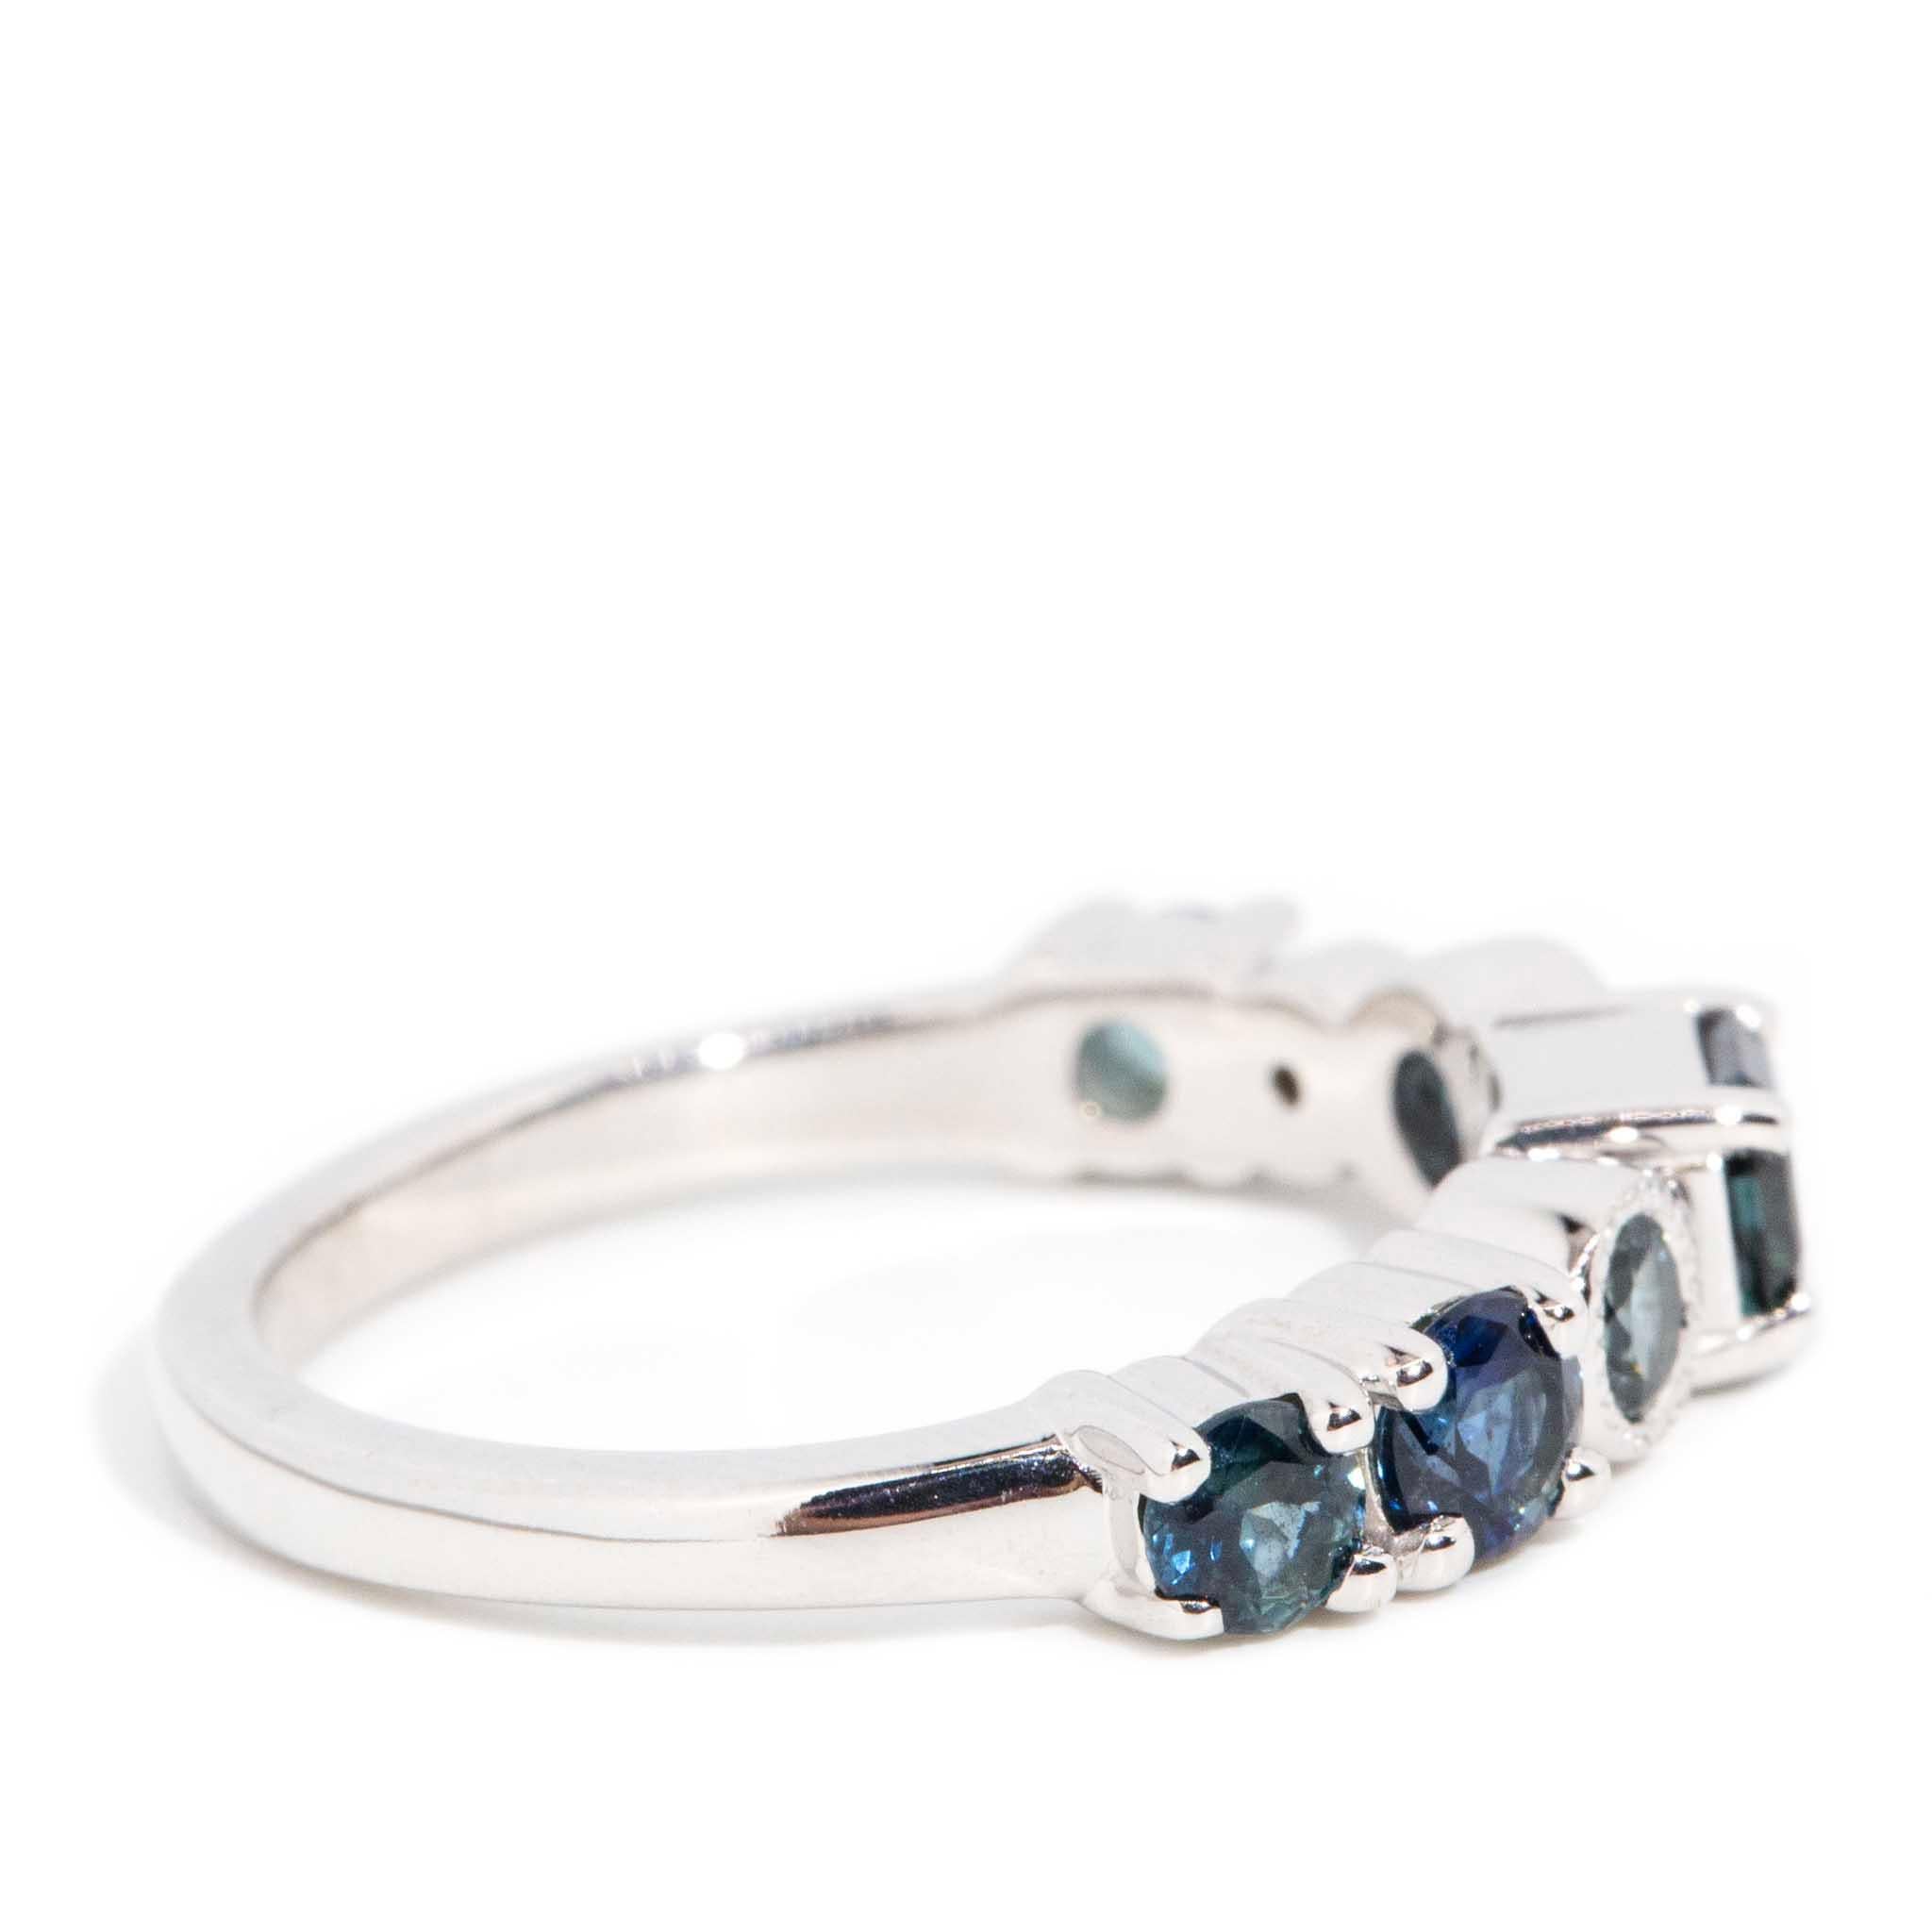 Contemporary 1.38 Carat Teal & Blue Sapphire & Diamond 18 Carat White Gold Ring For Sale 1